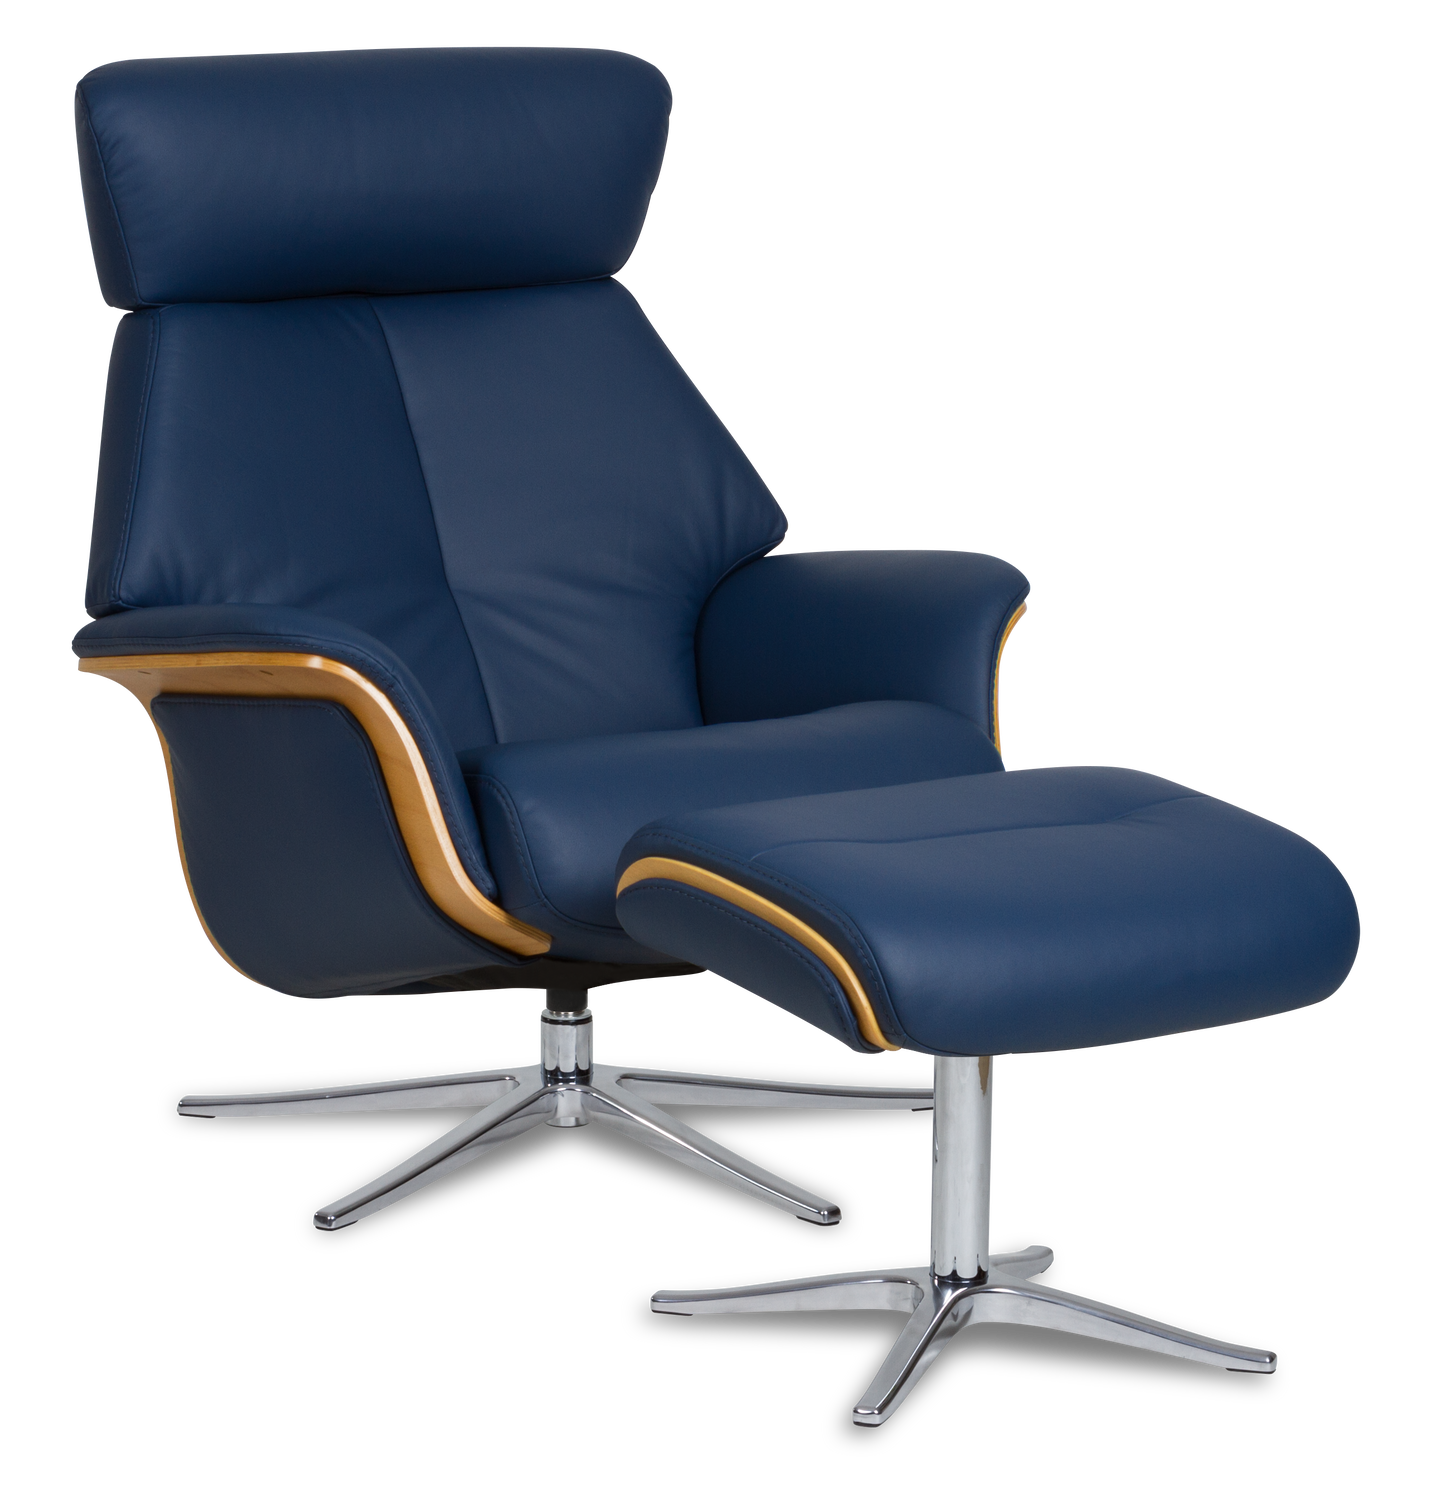 Space 57.57 Recliner Sale by IMG Comfort Norway Stockist Make Your House A Home, Furniture Store Bendigo. Australia Wide Delivery.